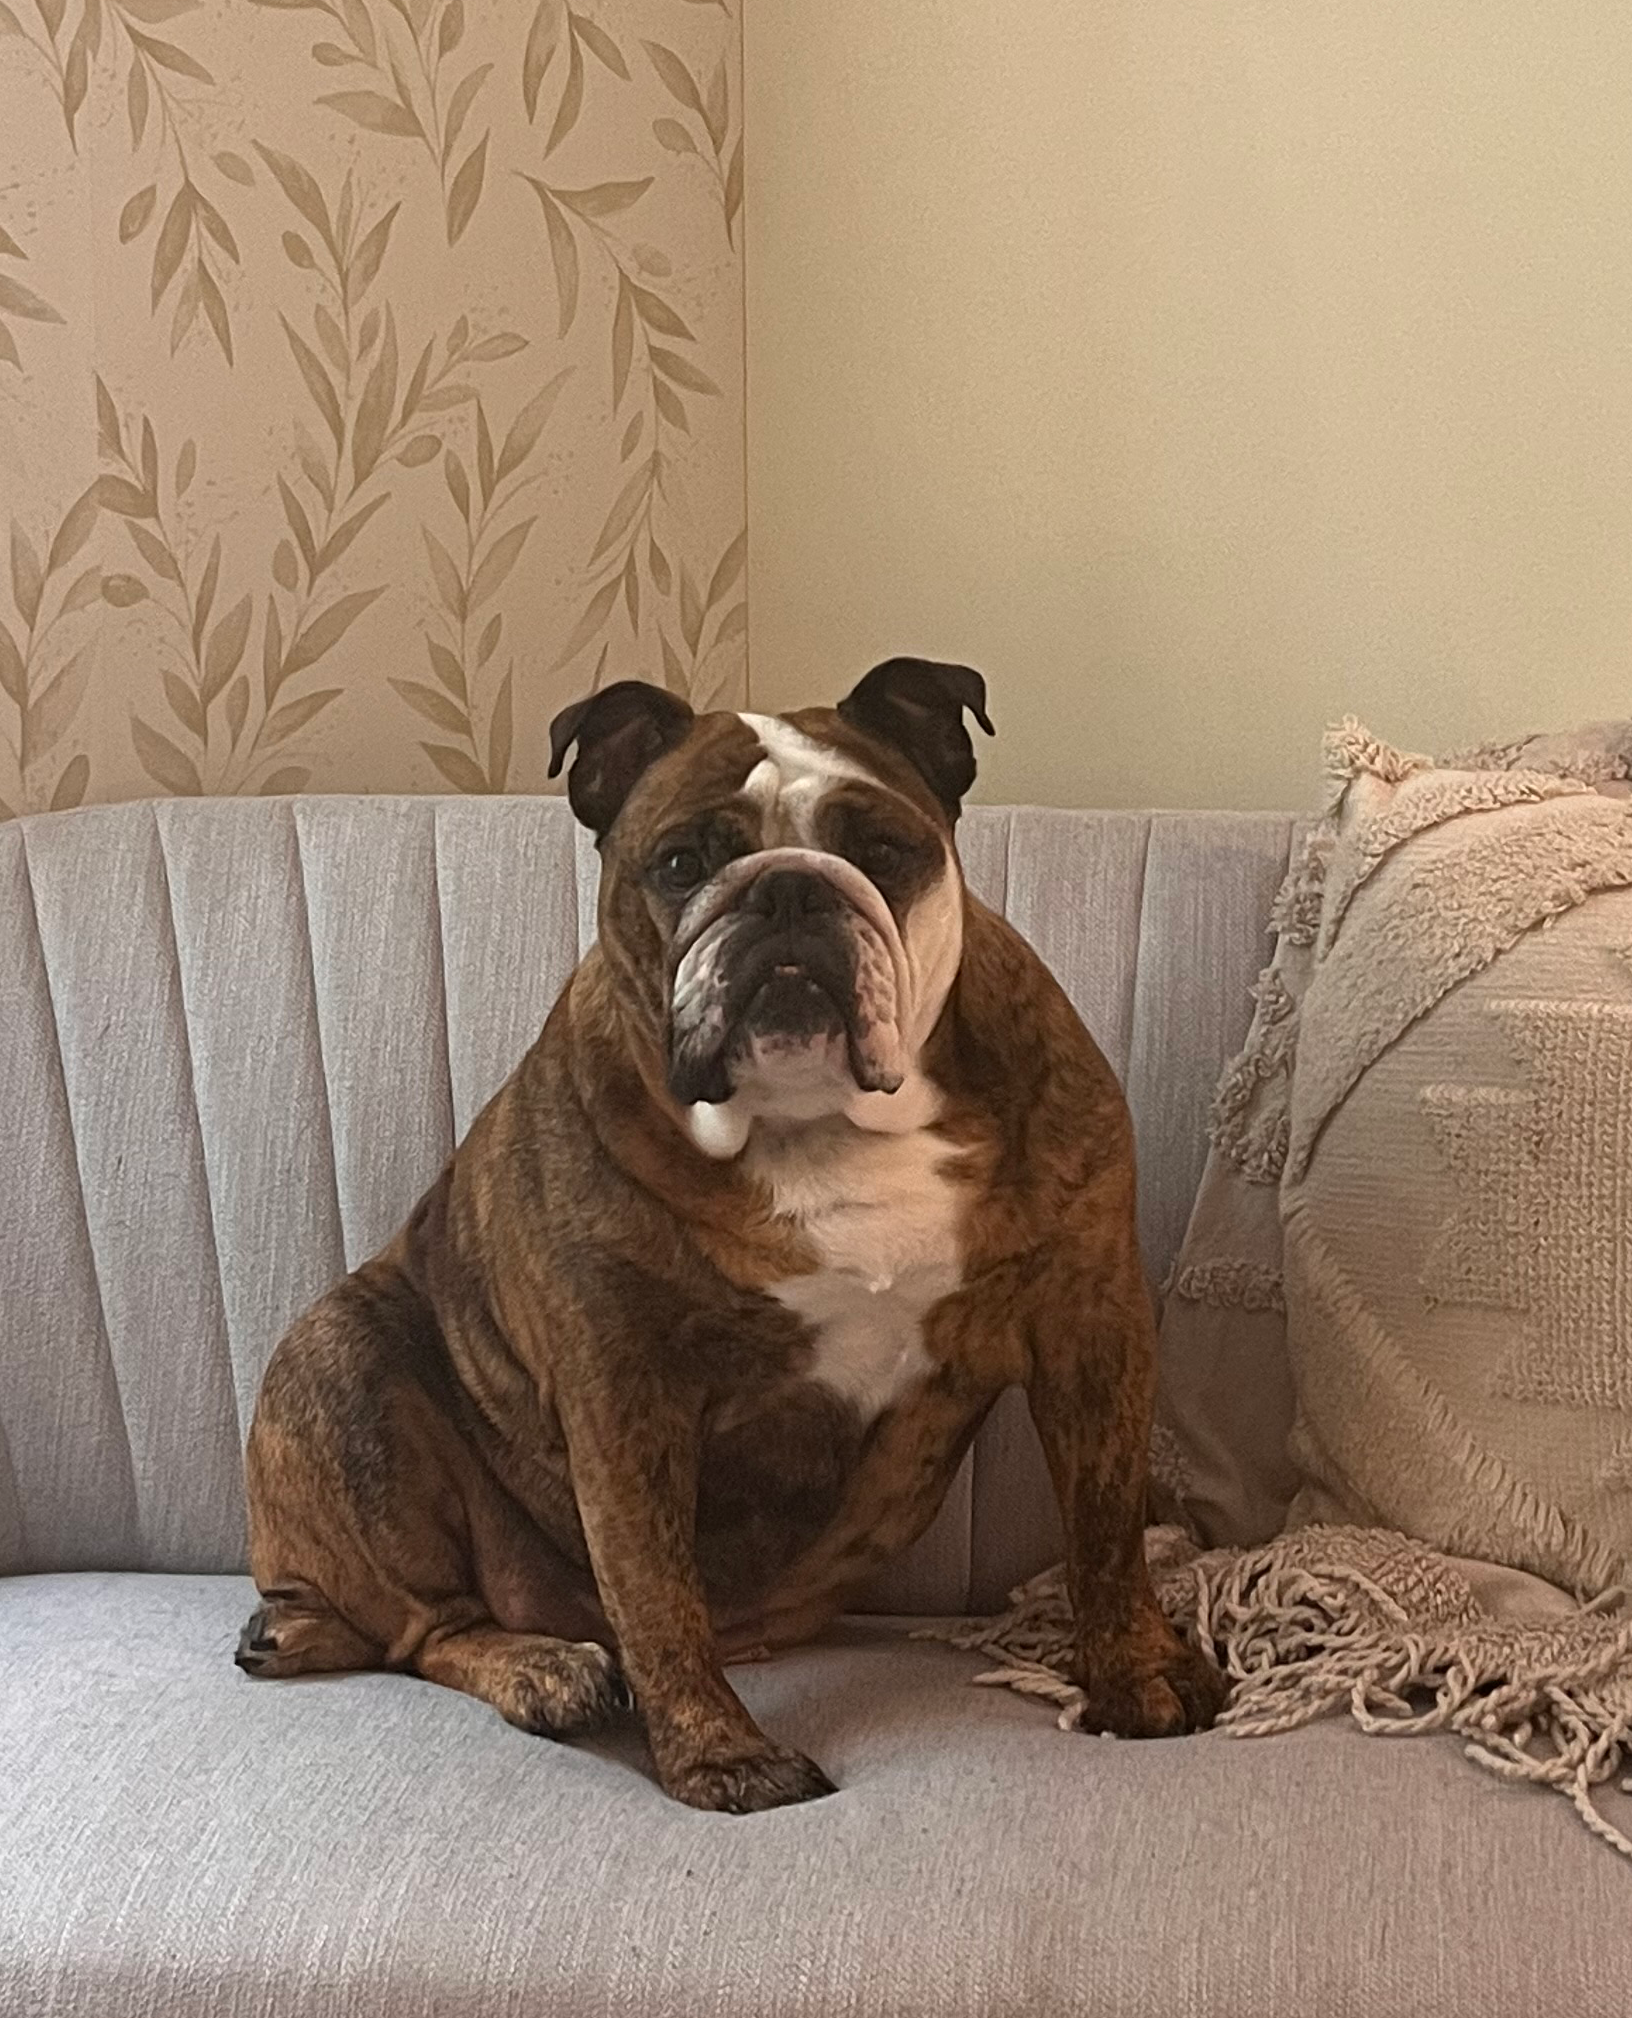 brown bulldog with white chest and white markings on chin and right side of face